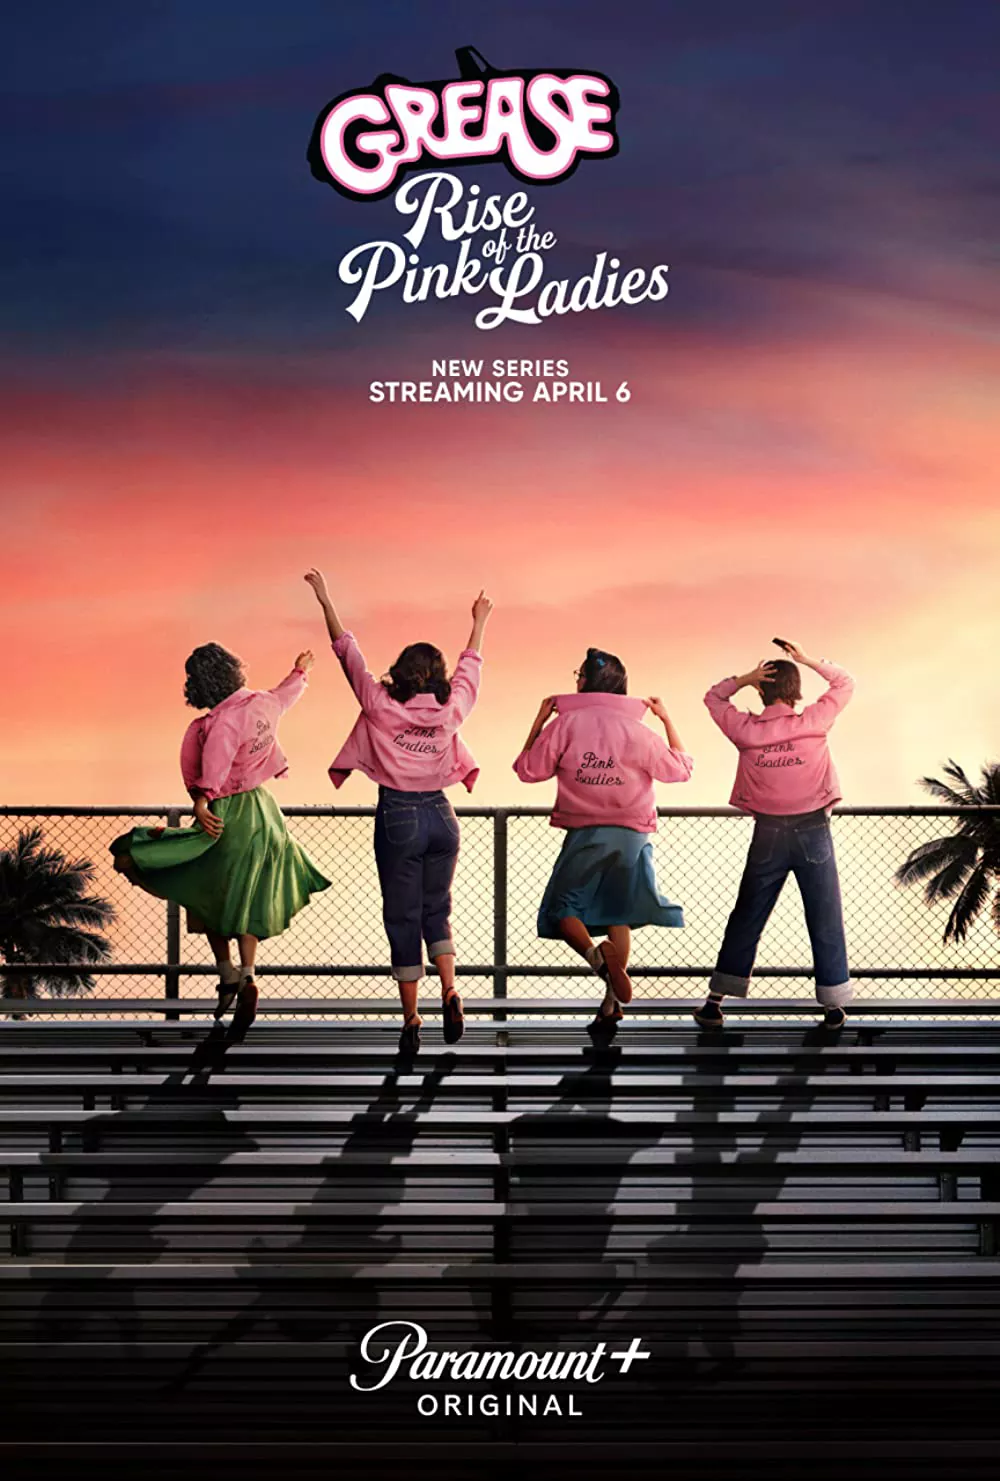 Trailer Από Τη Νέα Σειρά "Grease: Rise of the Pink Ladies"